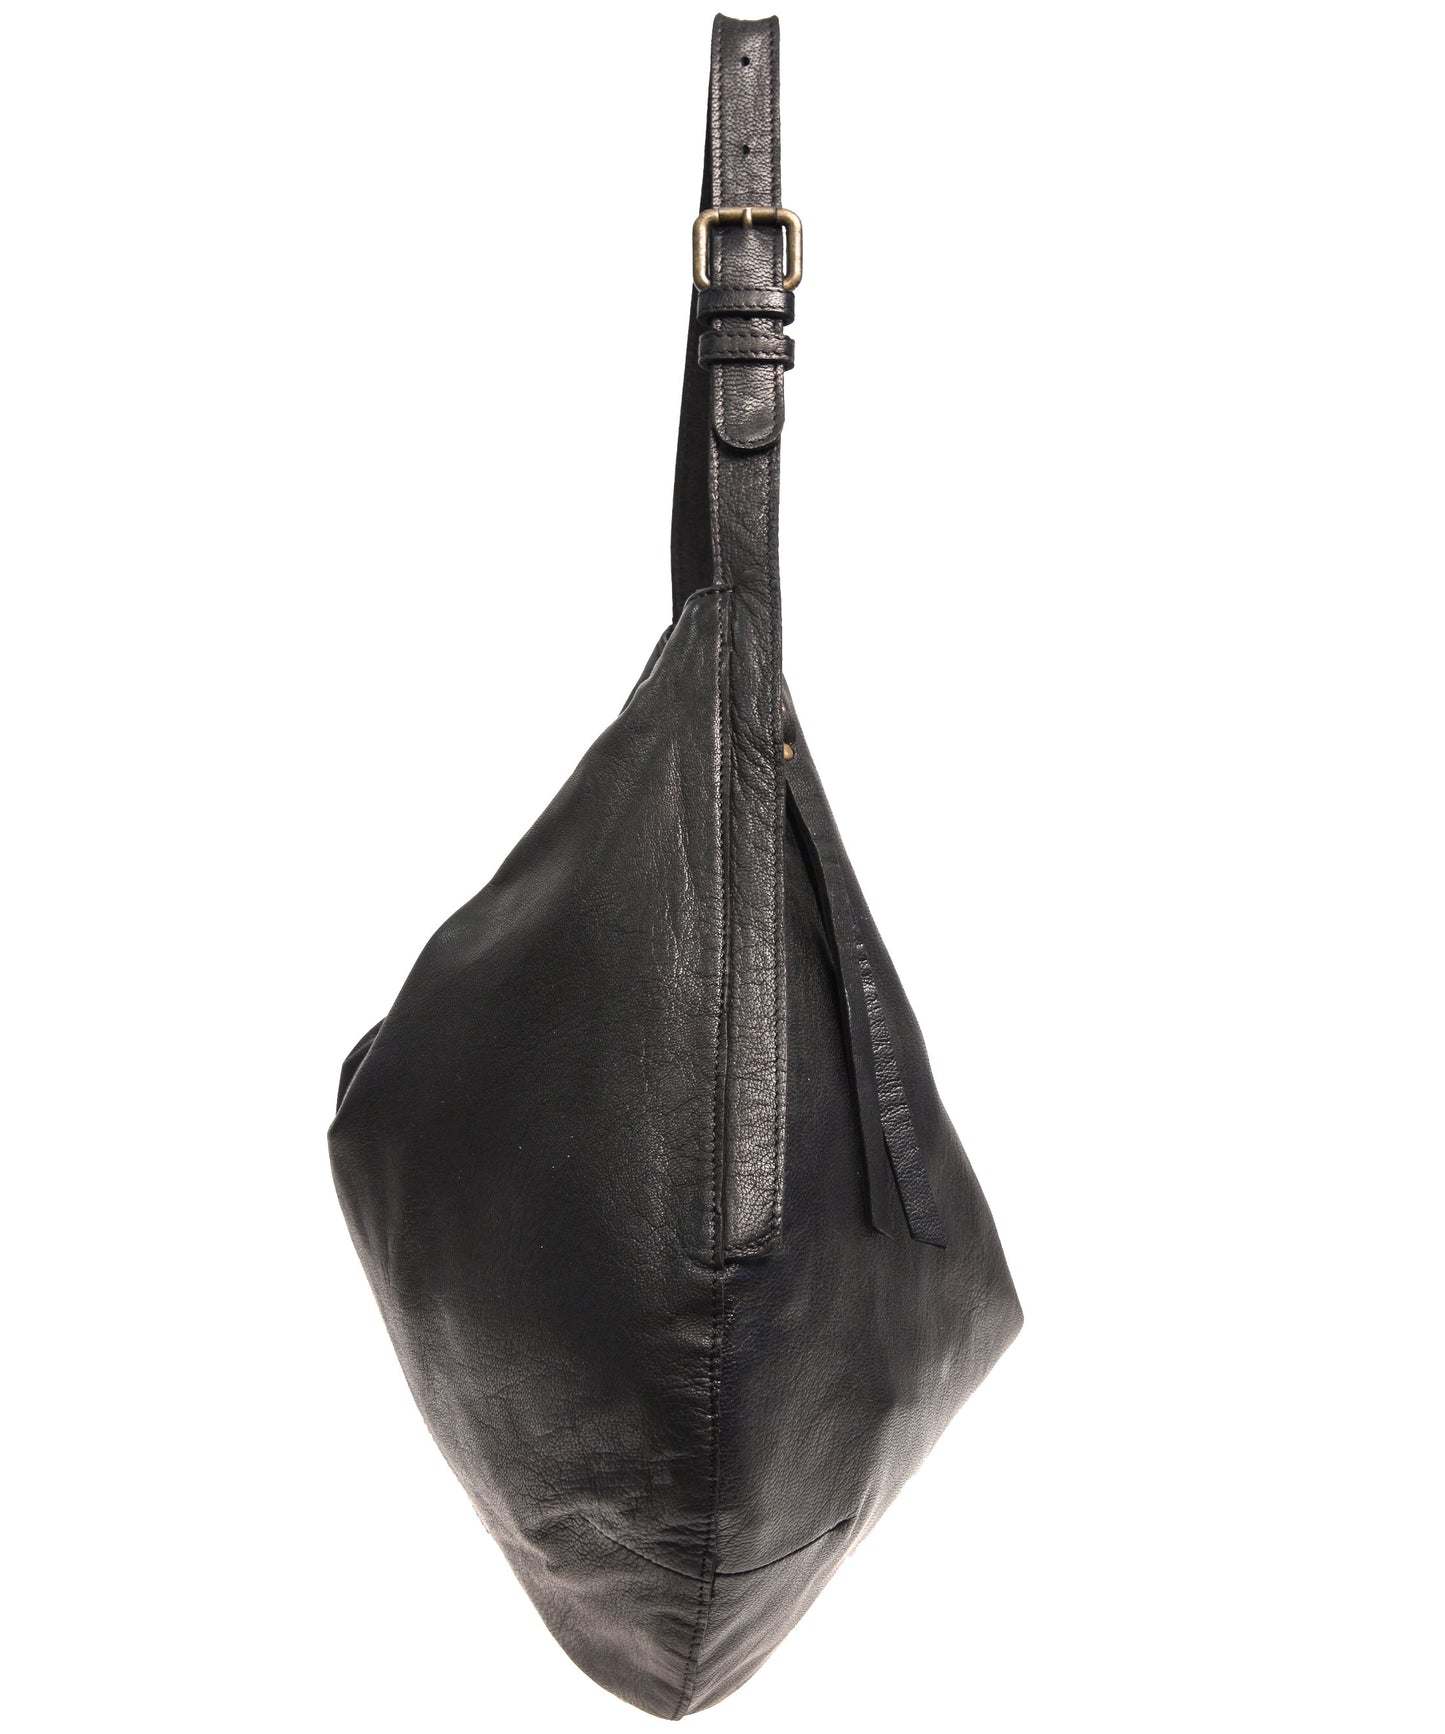 Tano Rounded Hobo with Two Side Zip Pockets (2531220947028)